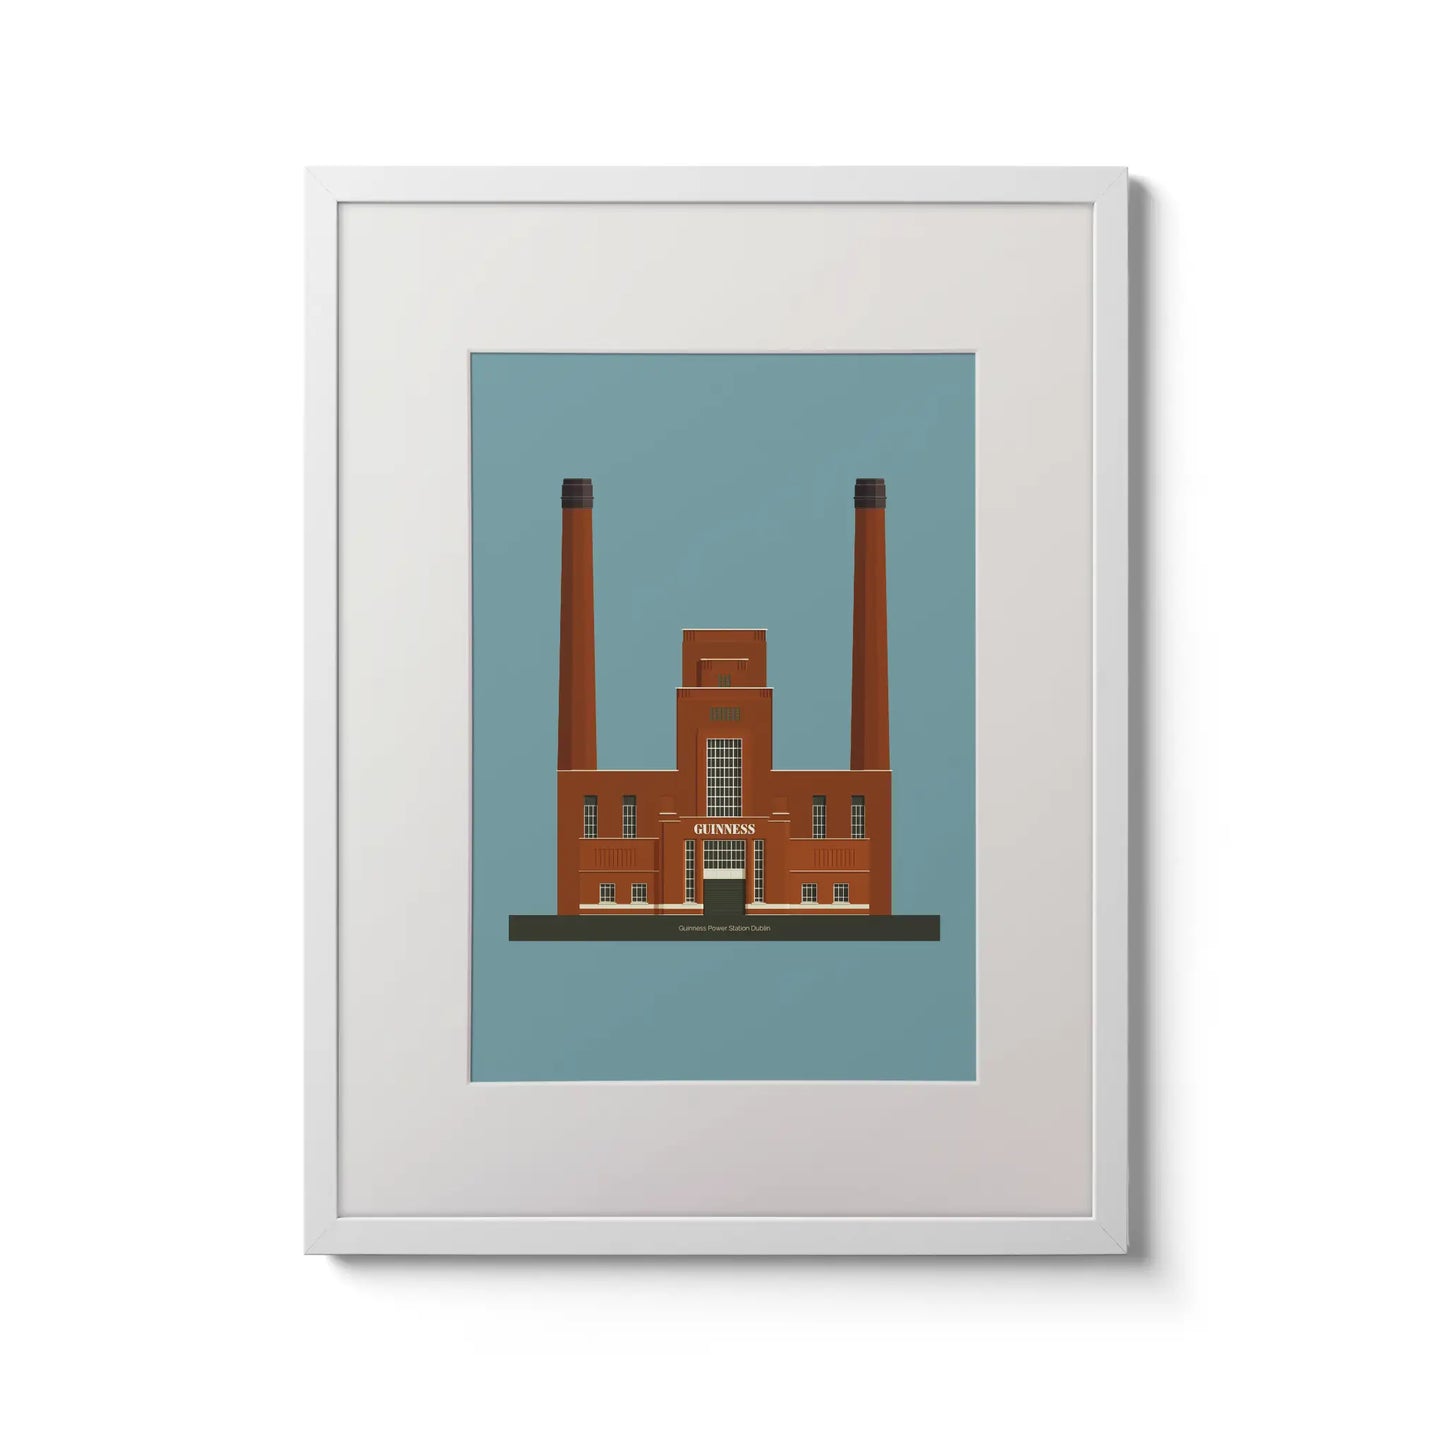 Framed  piece of wall art displaying the old Guinness brewery power plant in Dublin.